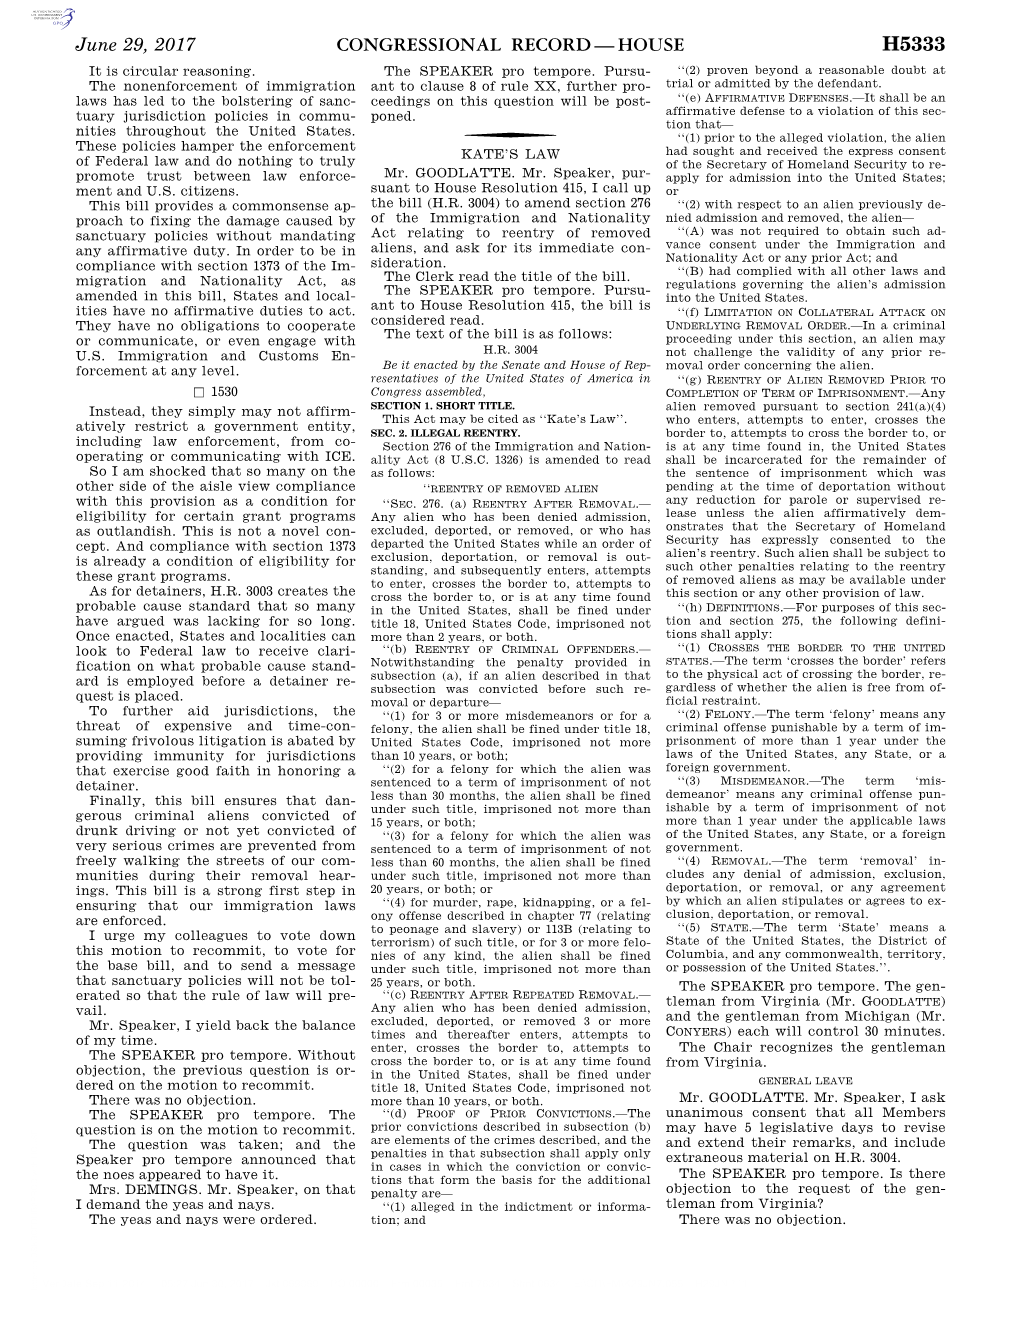 Congressional Record—House H5333